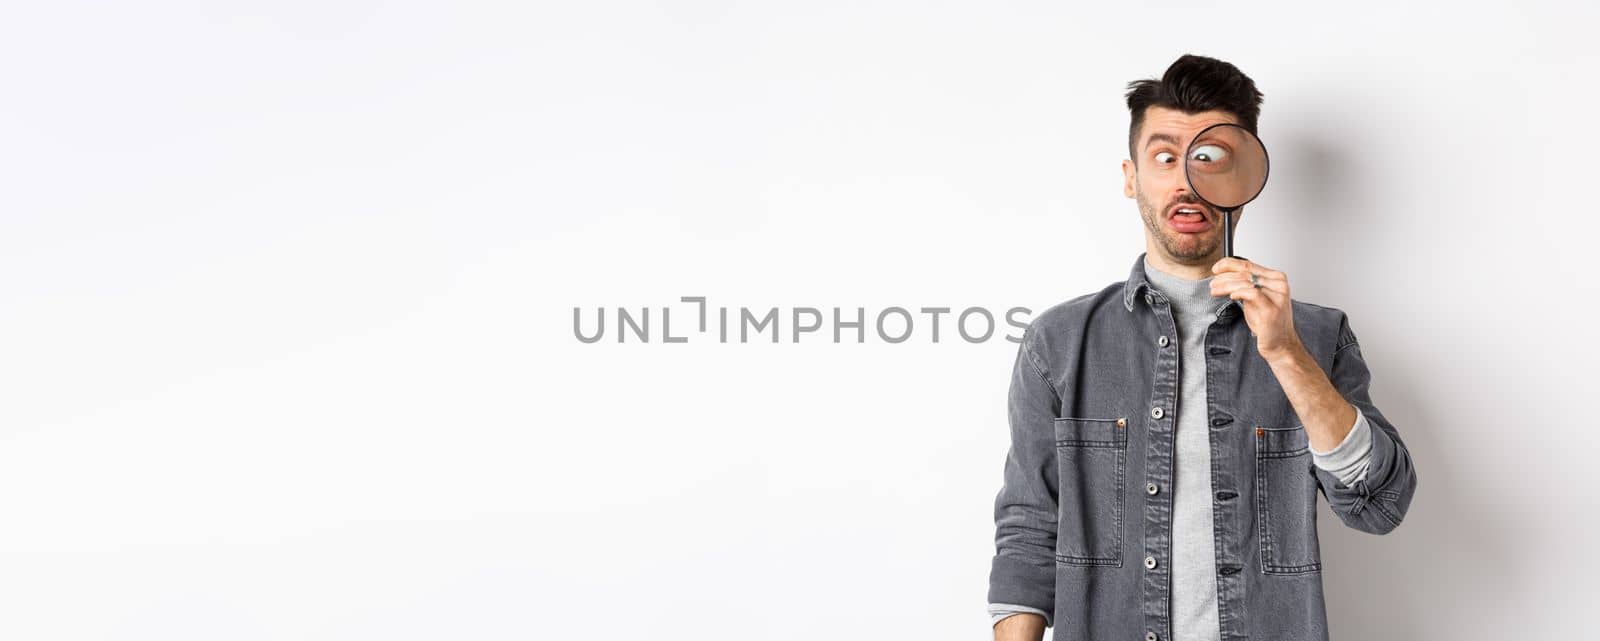 Funny young man squinting, showing faces with magnifying glass, standing on white background.